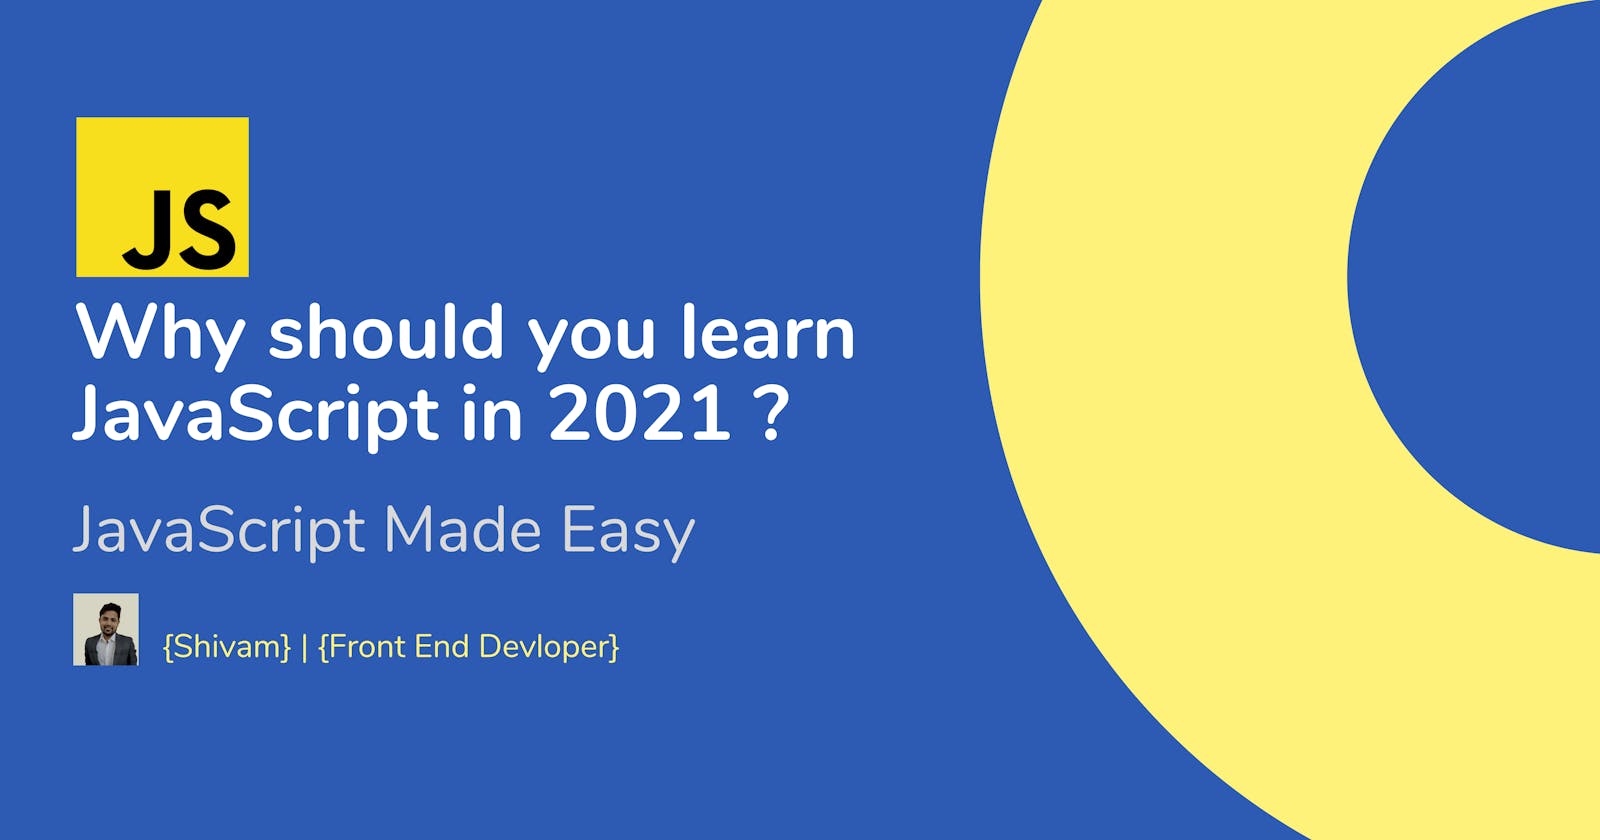 Why should you learn JavaScript in 2021 ?